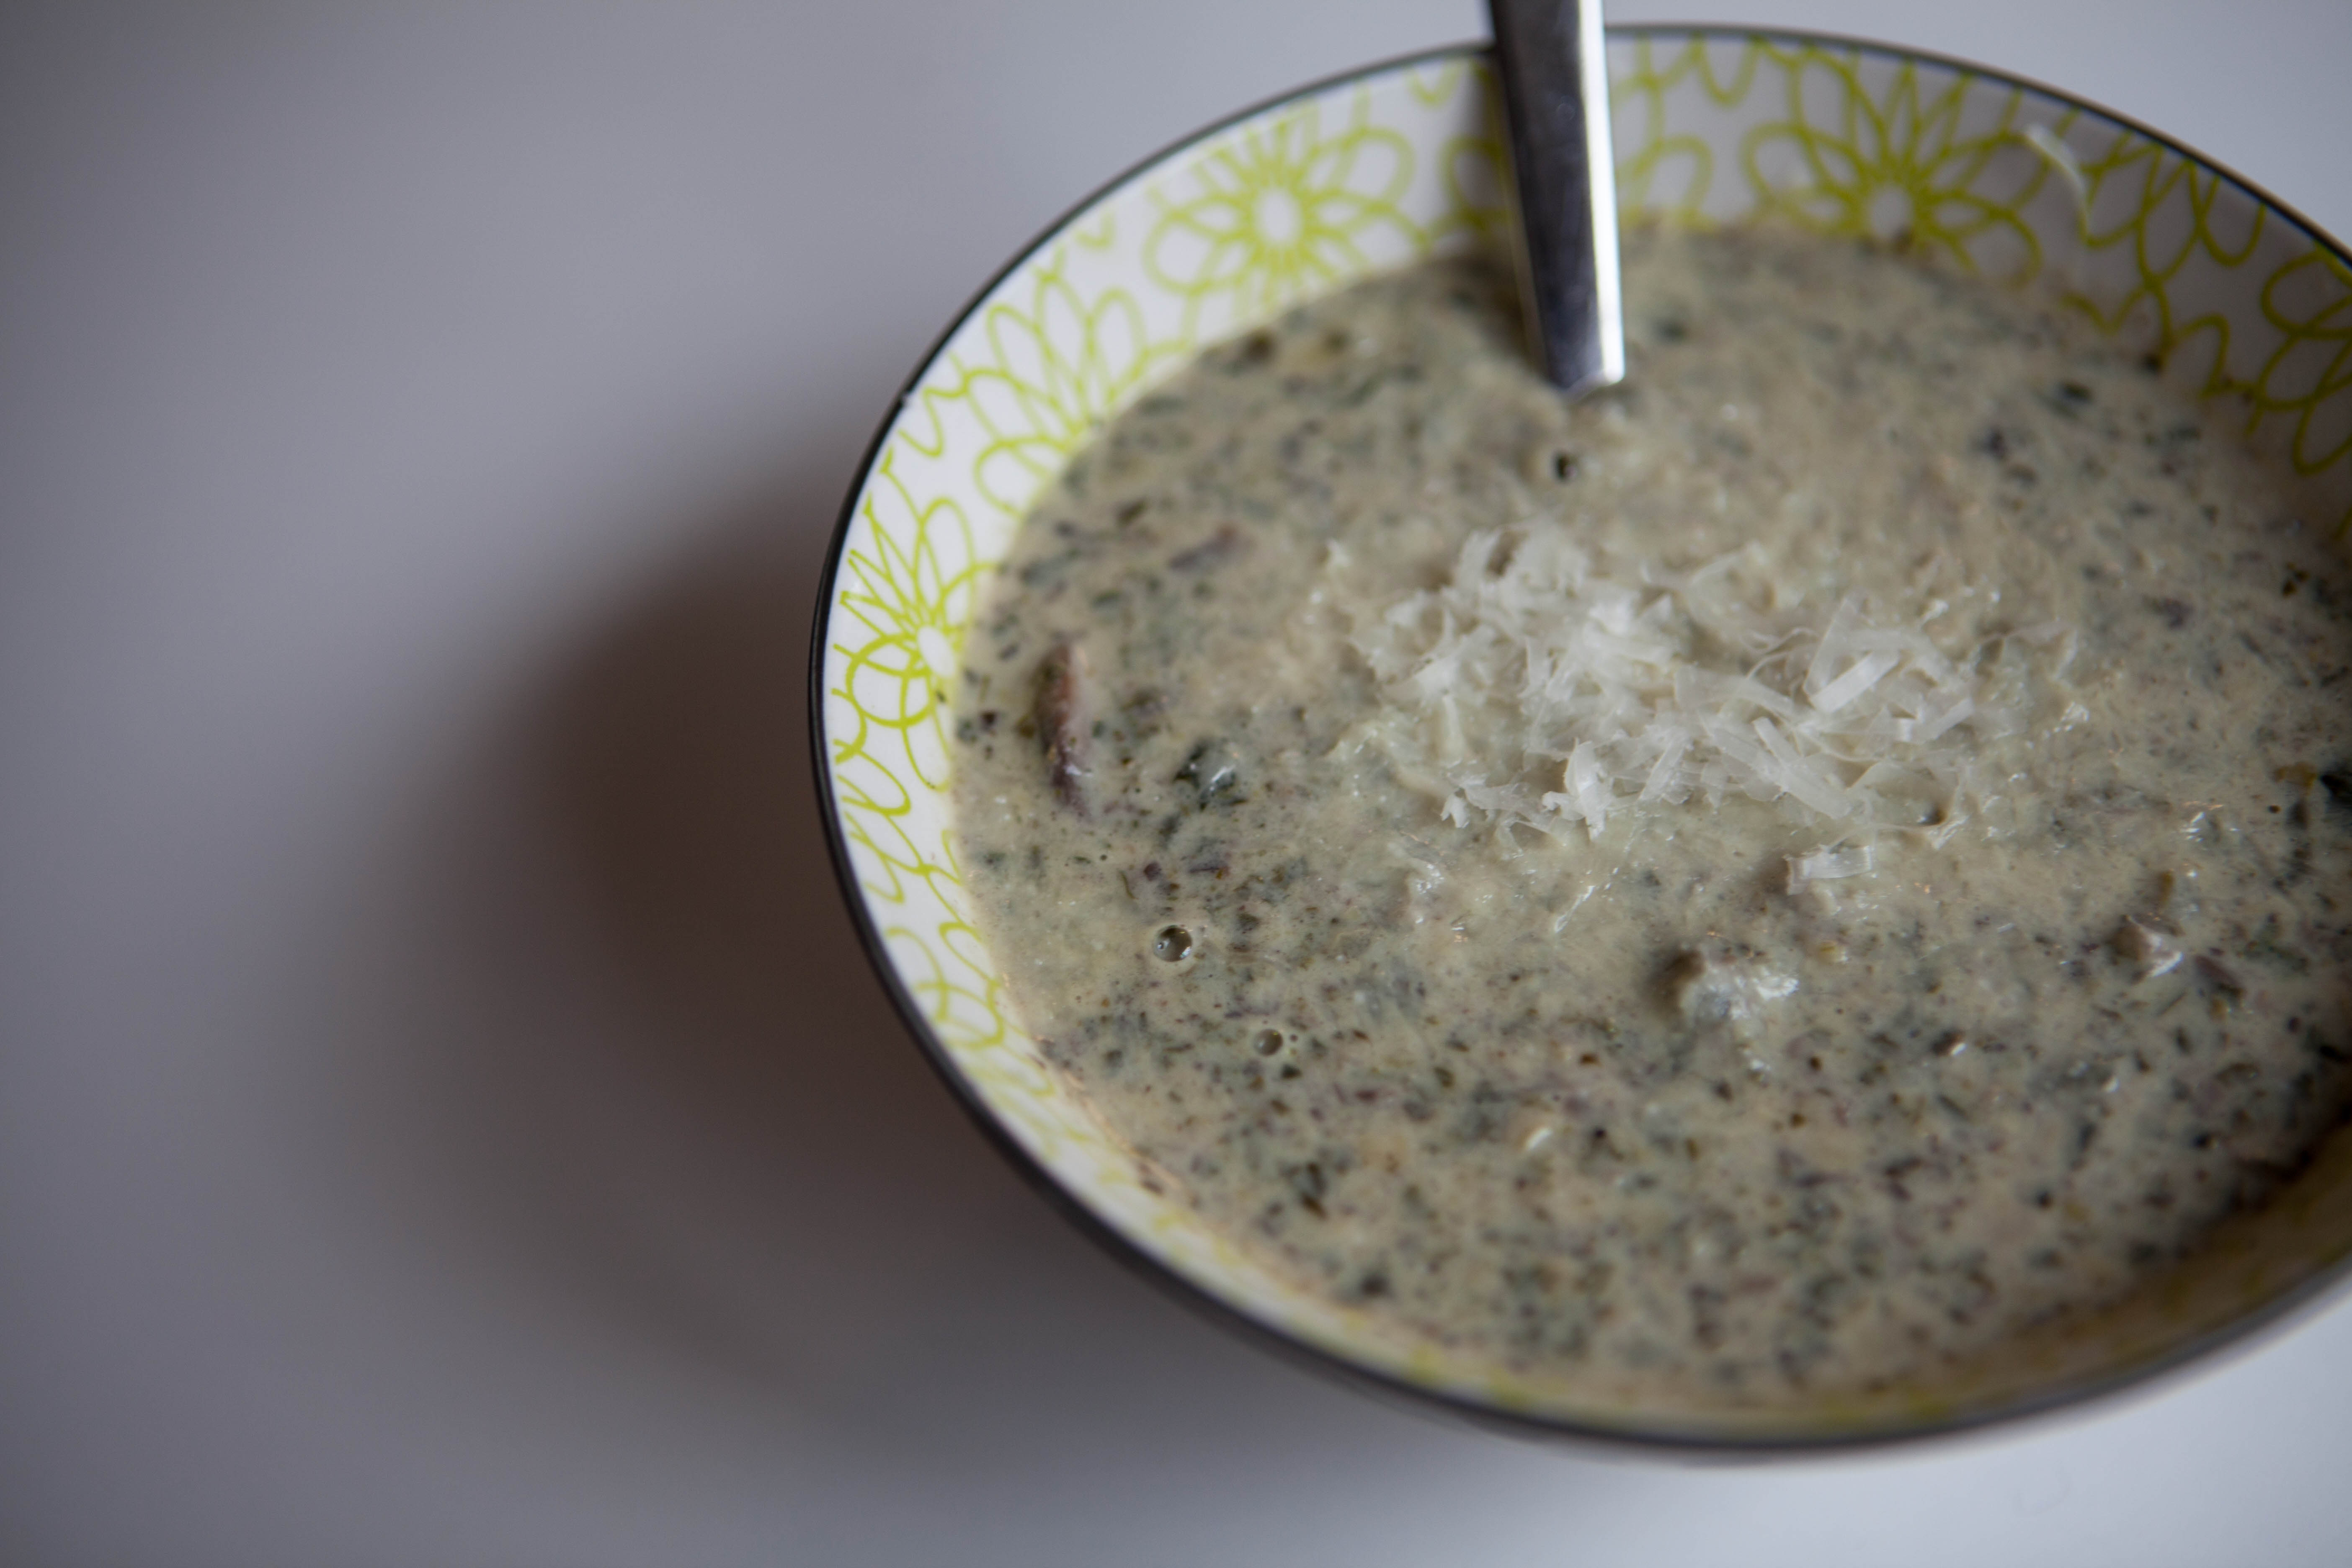 Spinach Artichoke Dip Soup | A delicious recipe from Alaskaknitnat.com adapted from "The Keto Reset Instant Pot Cookbook" by Mark Sisson